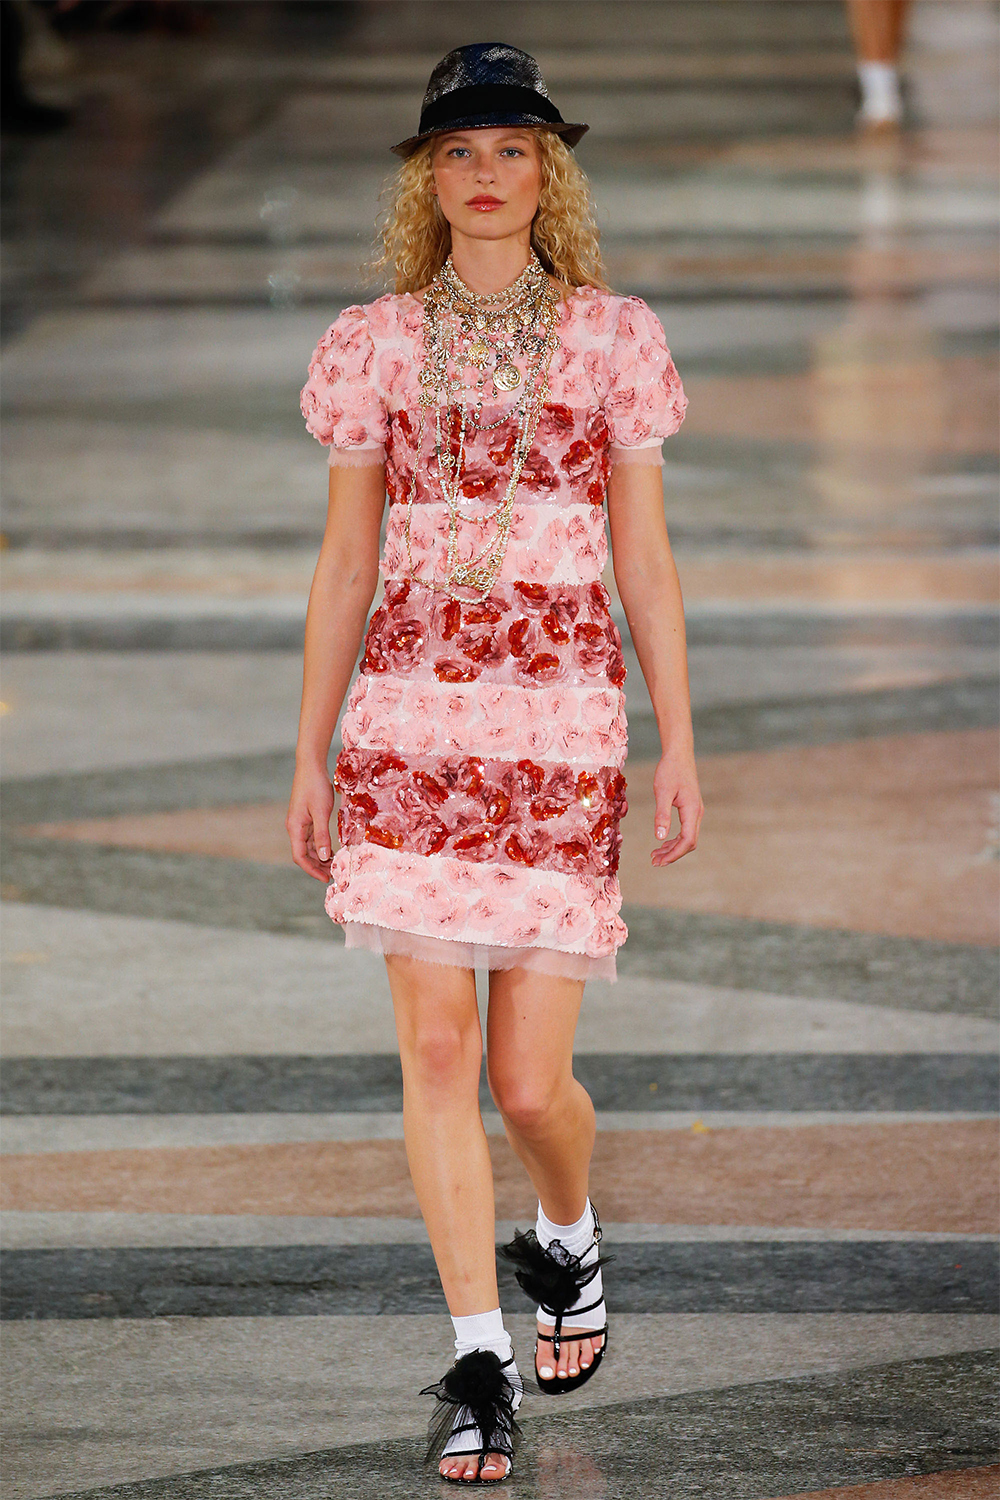 Chanel Cruise Collection 2016/2017. Photo: Getty Images.